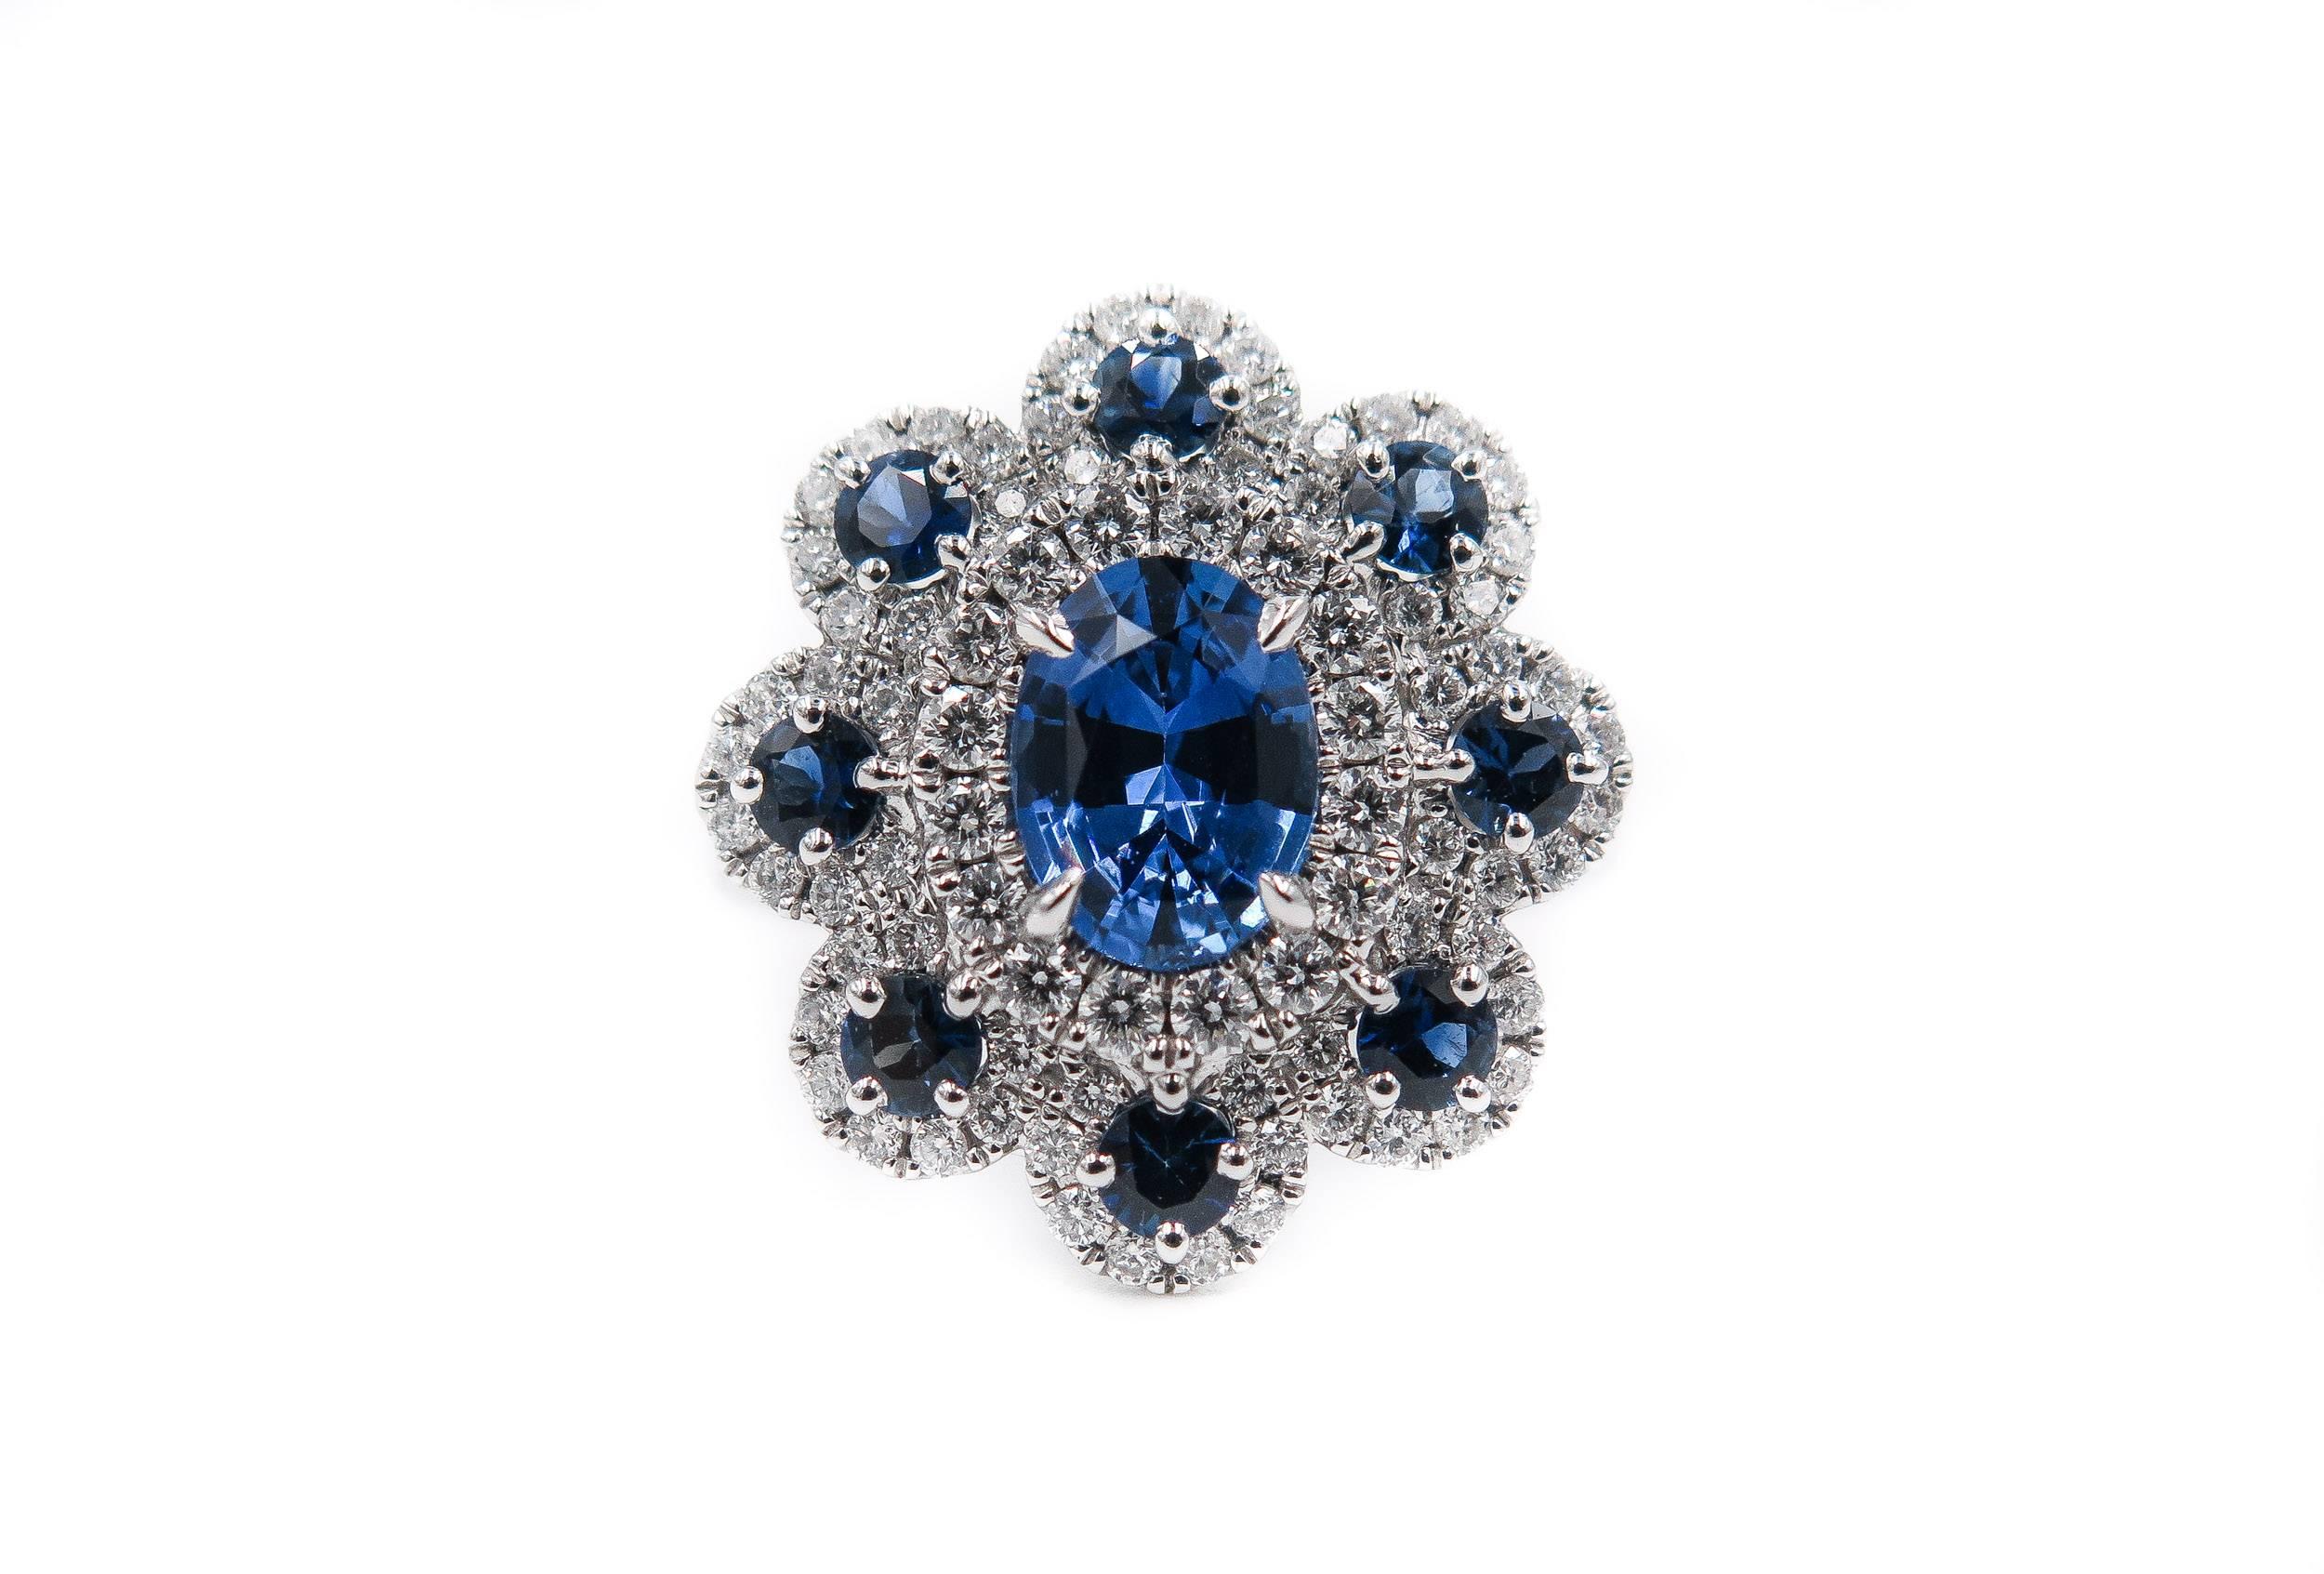 A gorgeous sapphire and diamond ring handcrafted in 18K white gold.
The central oval shaped sapphire, weighing 1.40 carats, in a four claw setting, surrounded by round cut sapphires weighing 0.76 carats, each set in a halo of brilliant cut diamonds,